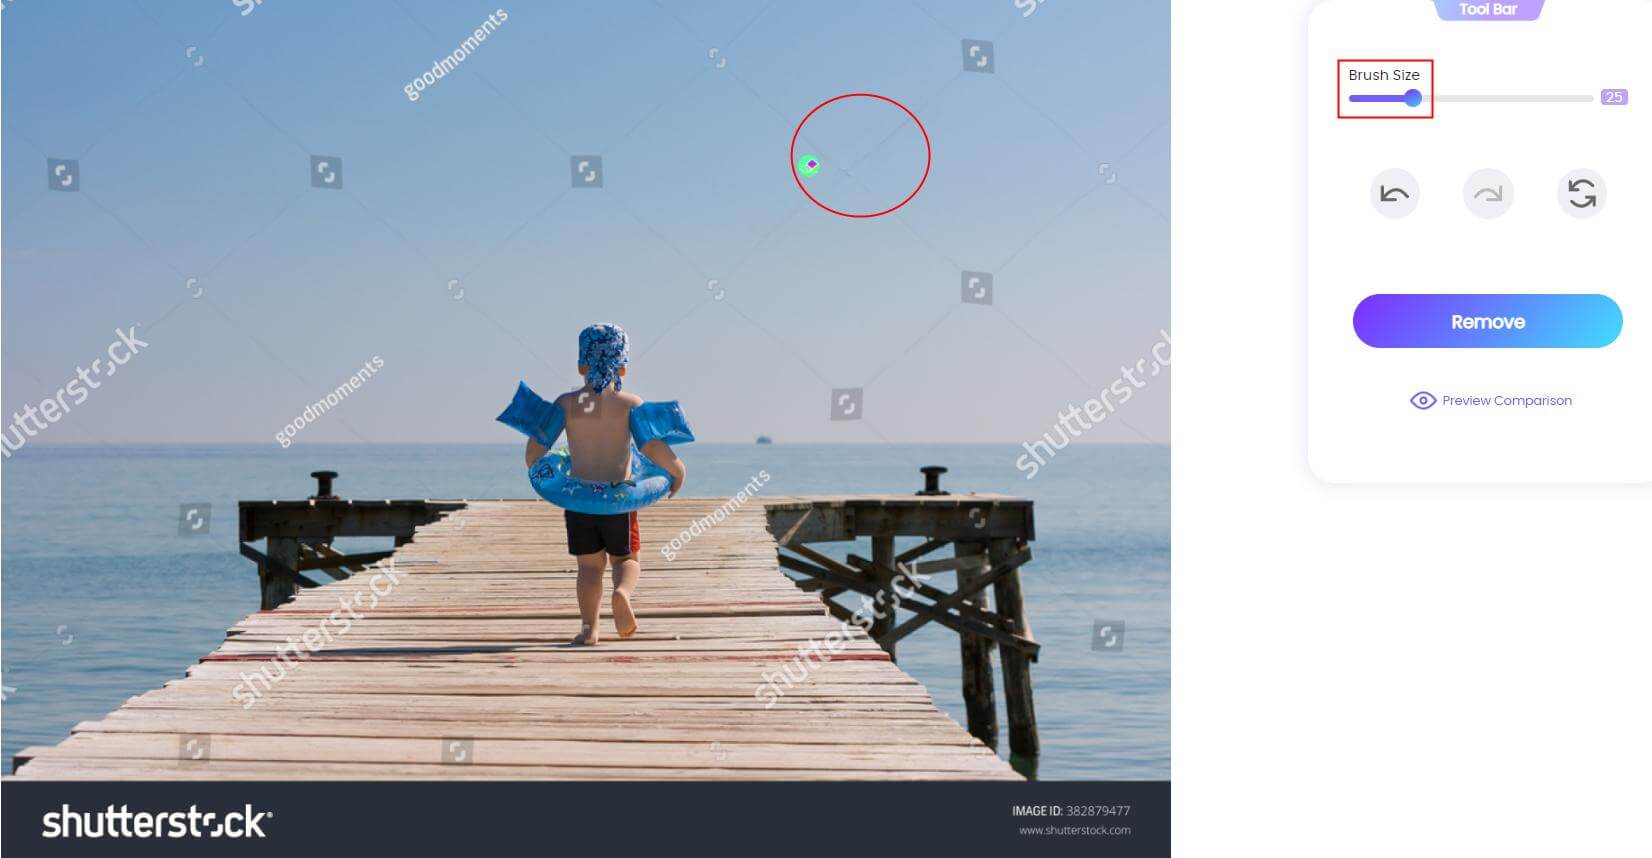 How to Remove Shutterstock Watermark from Image/Video Online